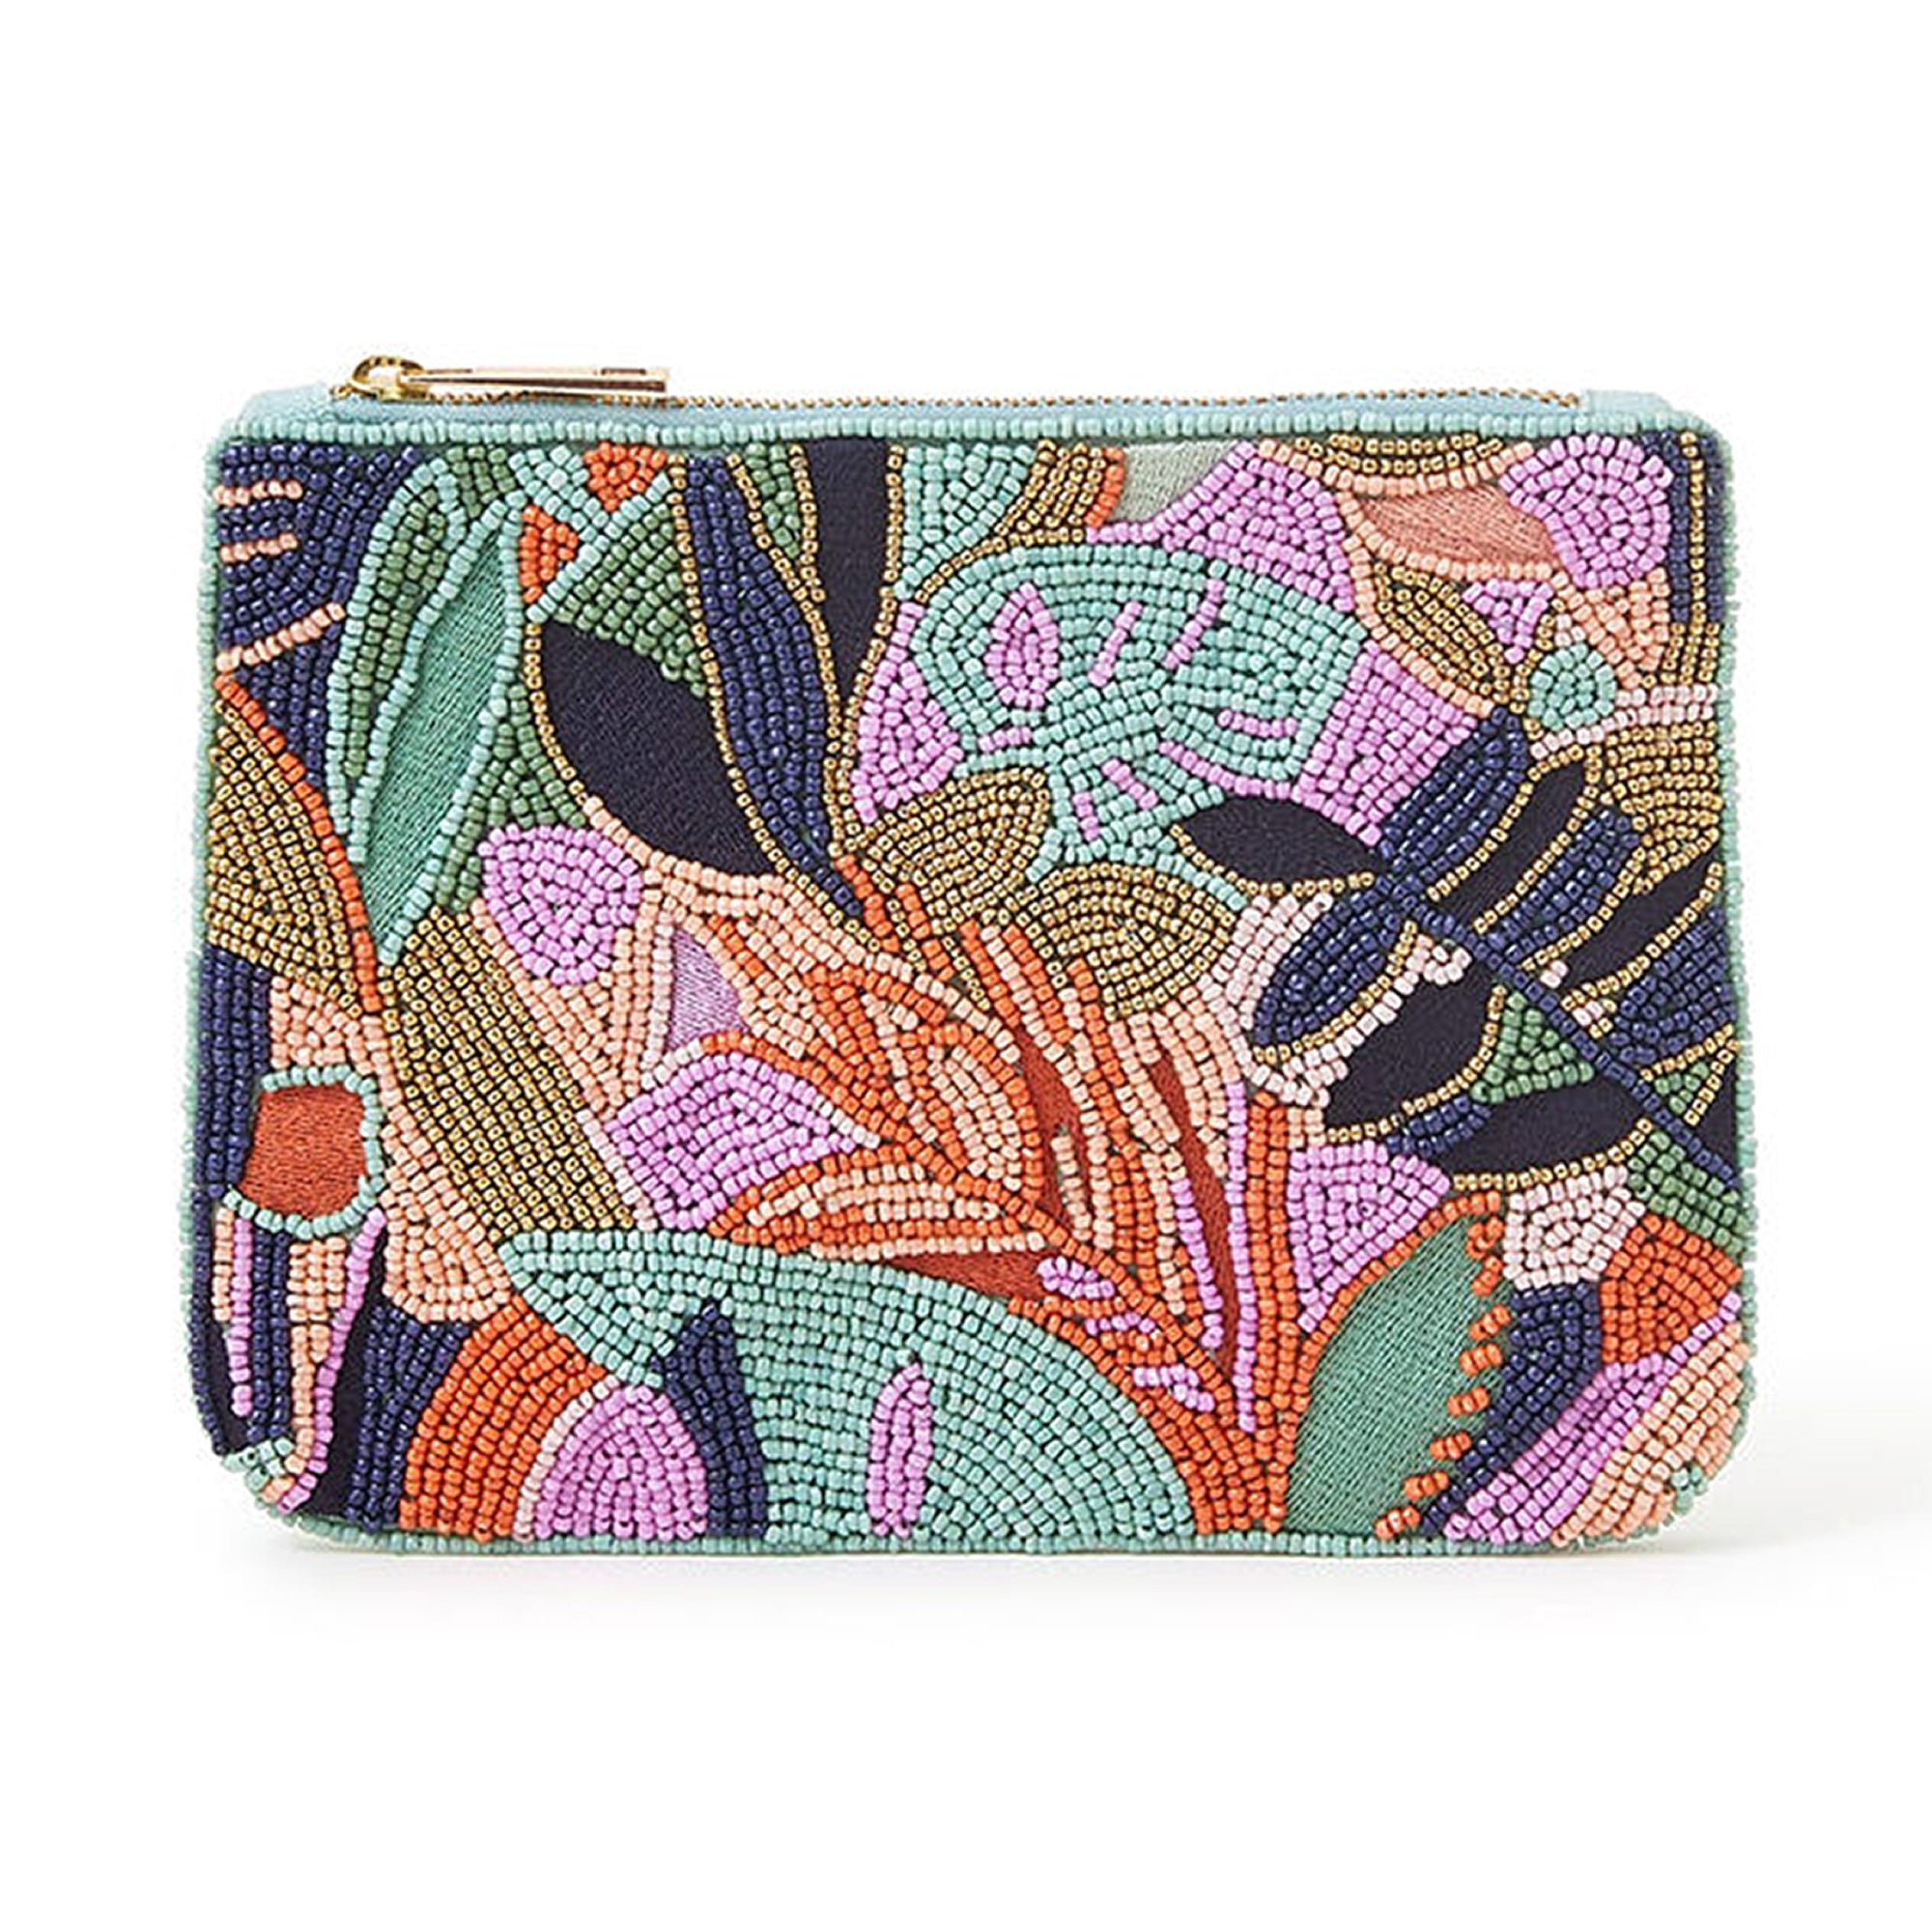 Accessorize London Multi Palm Print Embellished Pouch